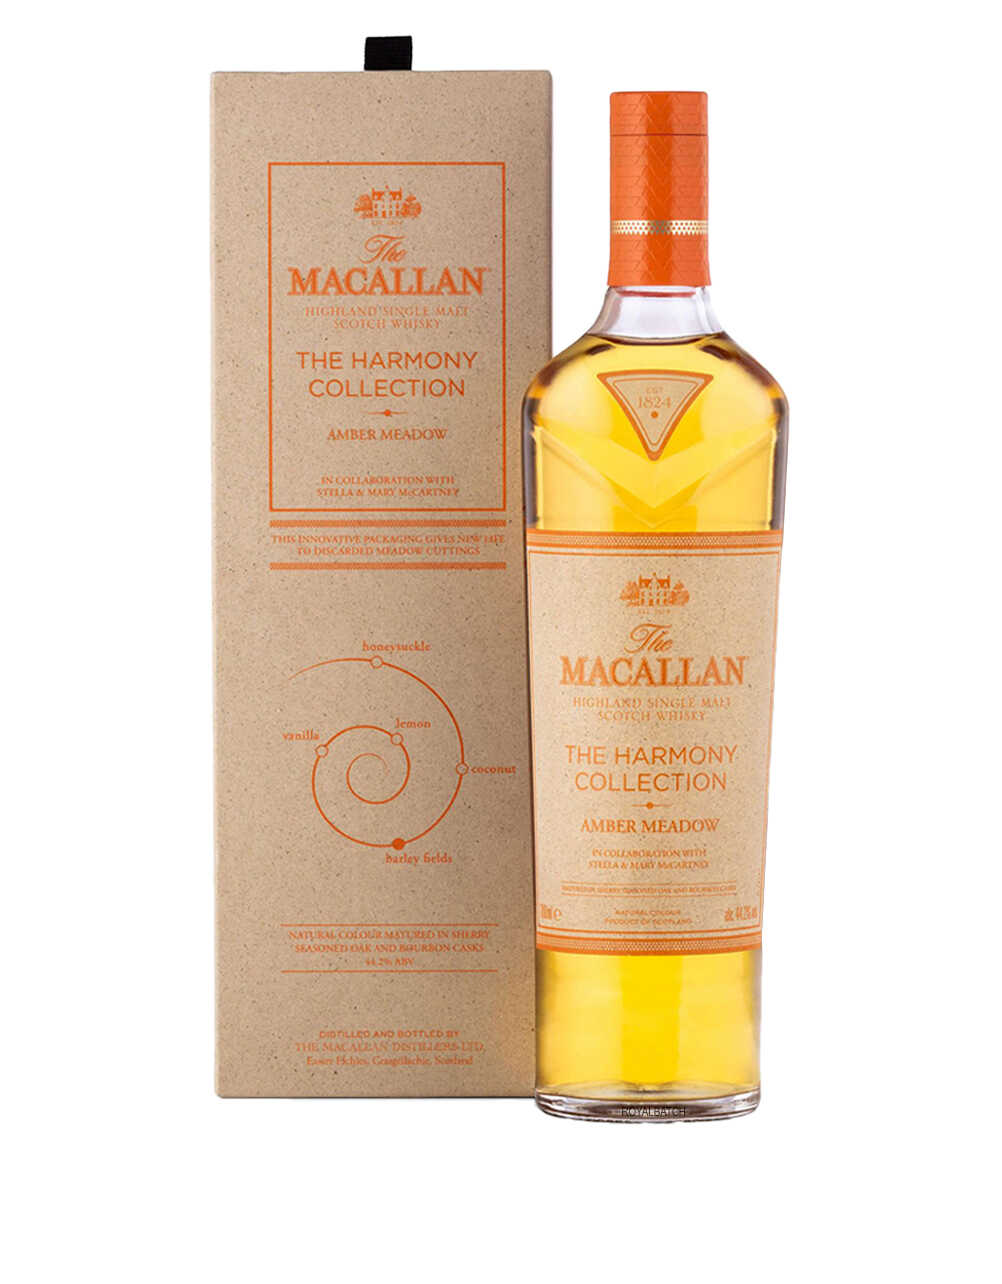 The Macallan The Harmony Collection Amber Meadow Scotch Whisky 2023